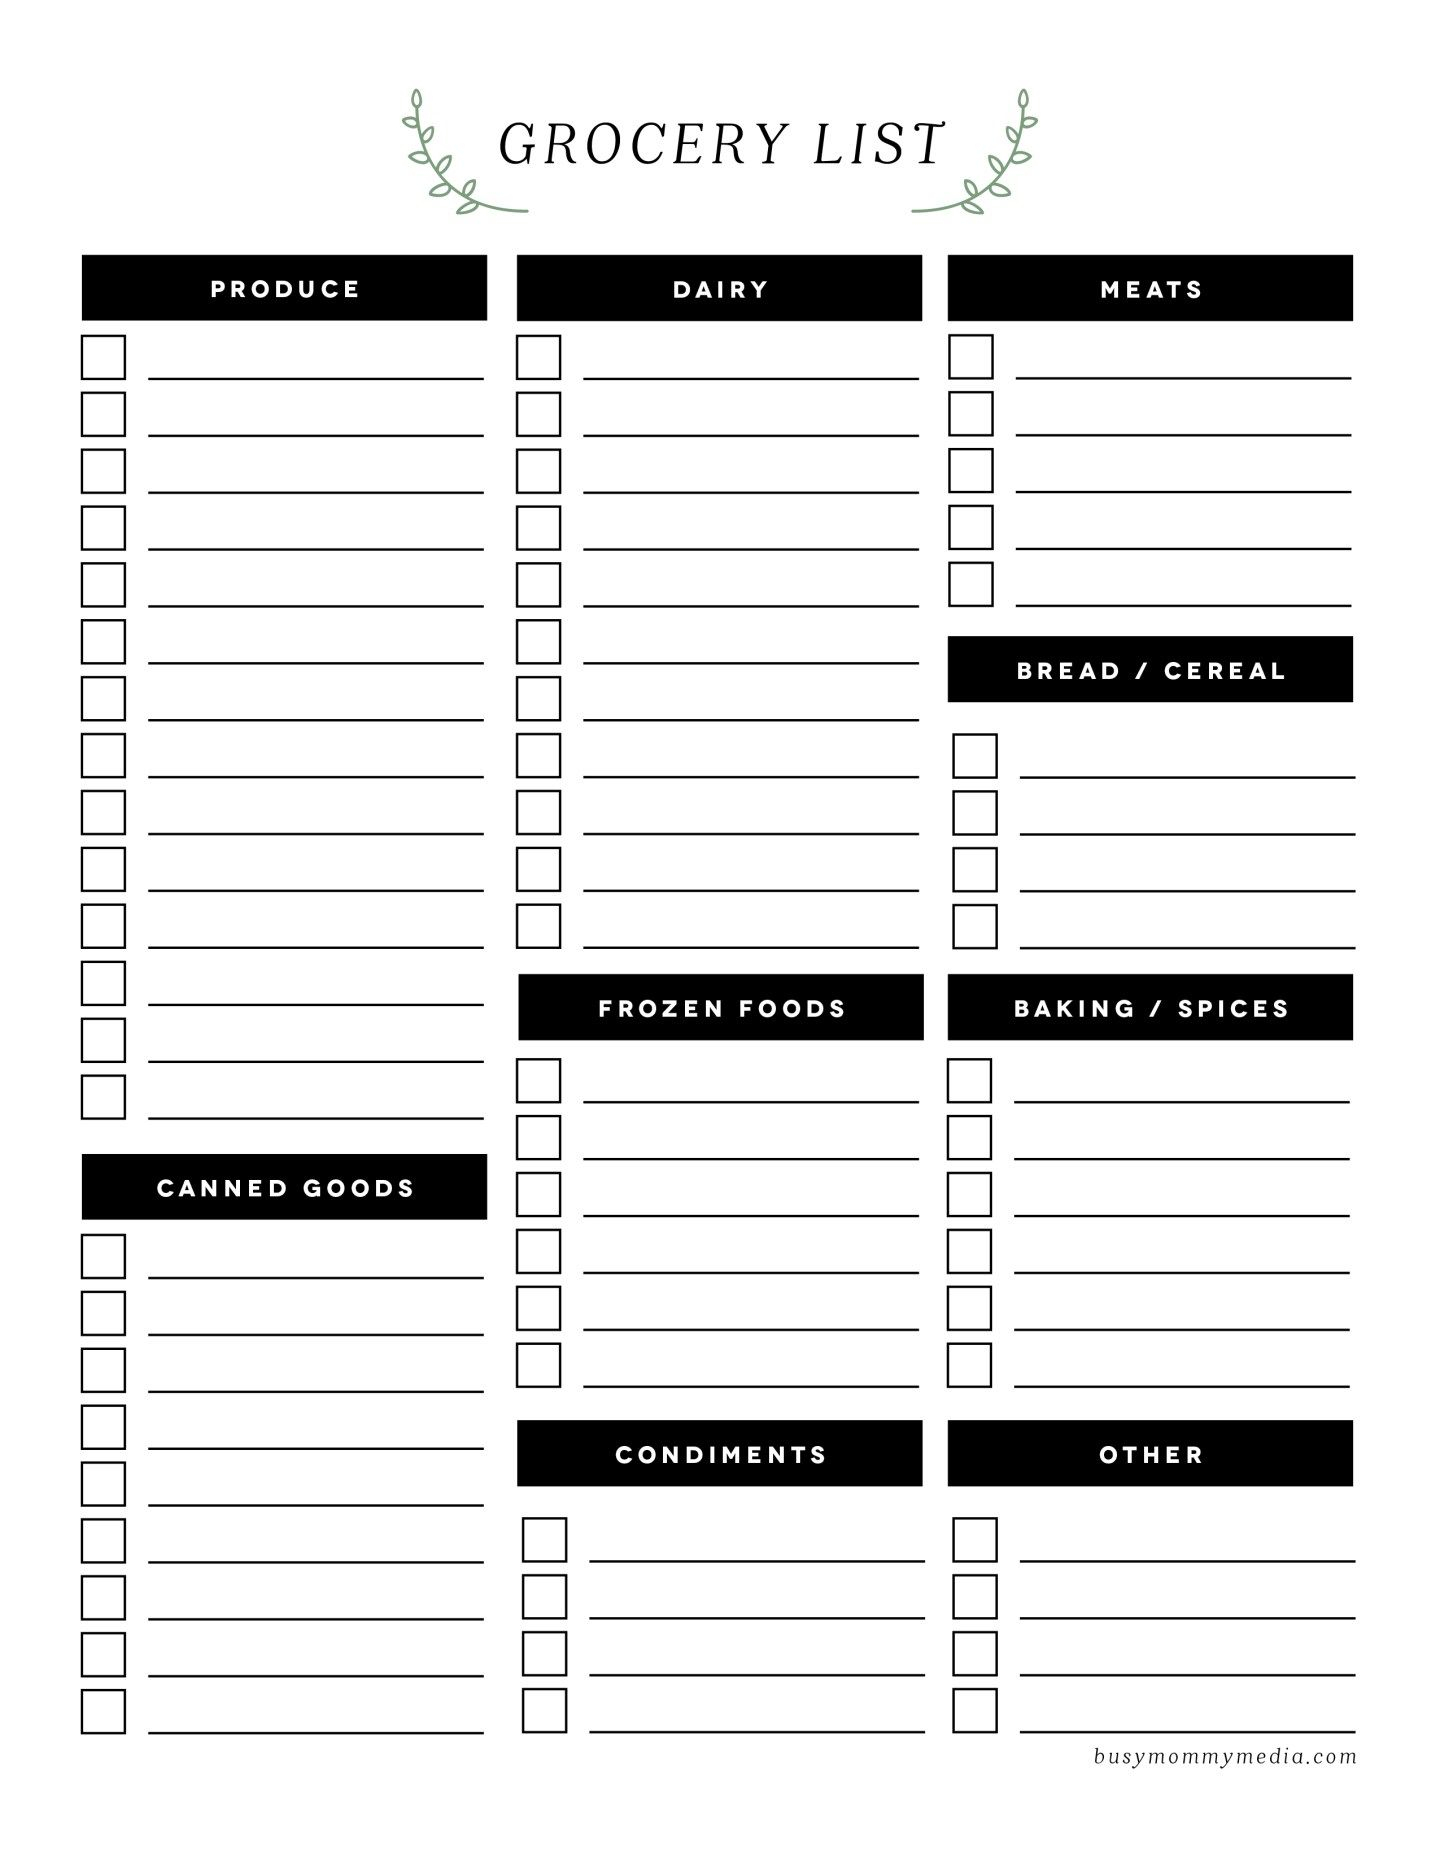 Grocery List Template  Louiesportsmouth